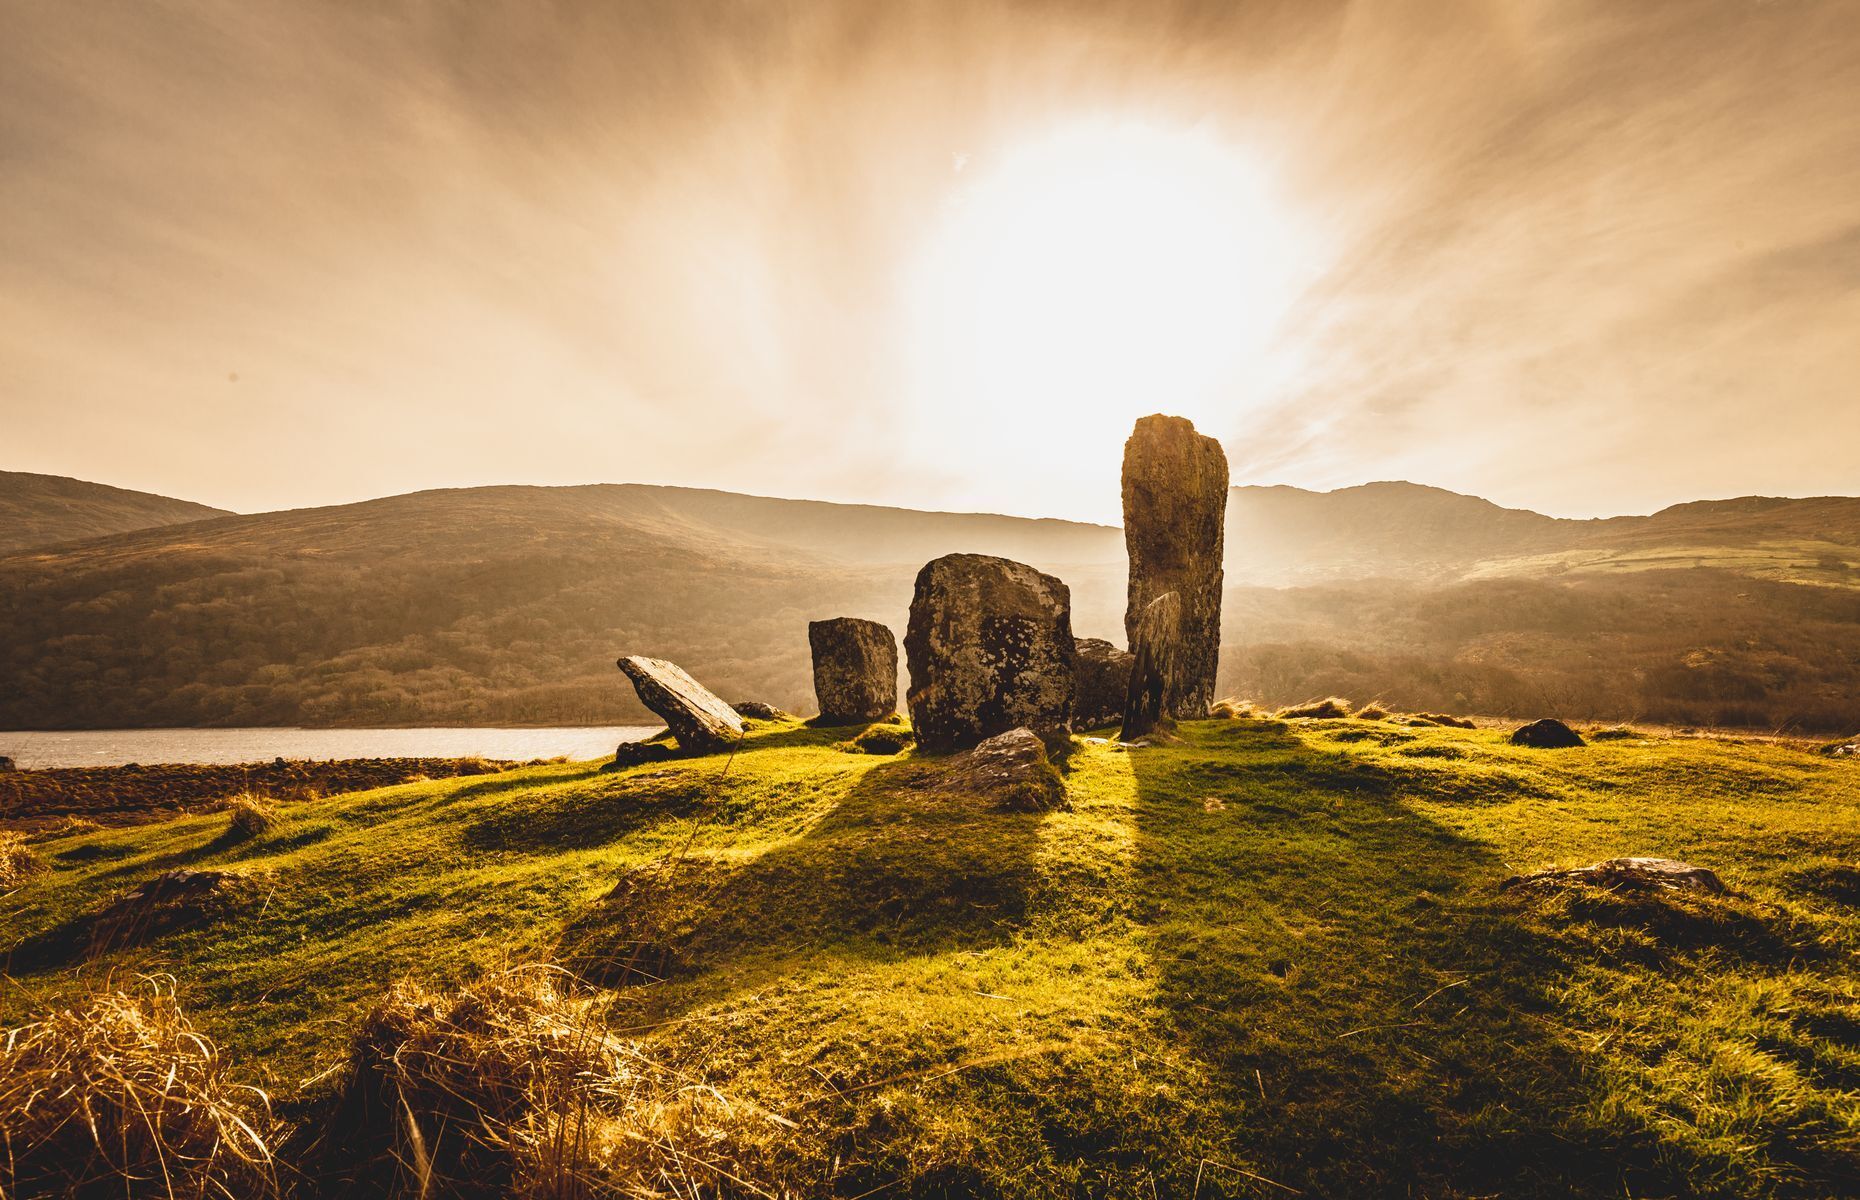 <p>A trip to Ireland is the perfect opportunity to learn more about its tumultuous <a href="https://www.livinginireland.ie/culture-society/a-brief-history-of-ireland/" rel="noreferrer noopener">history</a><a href="https://www.livinginireland.ie/culture-society/a-brief-history-of-ireland/" rel="noreferrer noopener">,</a> from its Celtic roots to internal conflicts sparked by the IRA. Likewise discover the Emerald Isle’s Gaelic origins as you explore the country and visit cultural sites.</p>